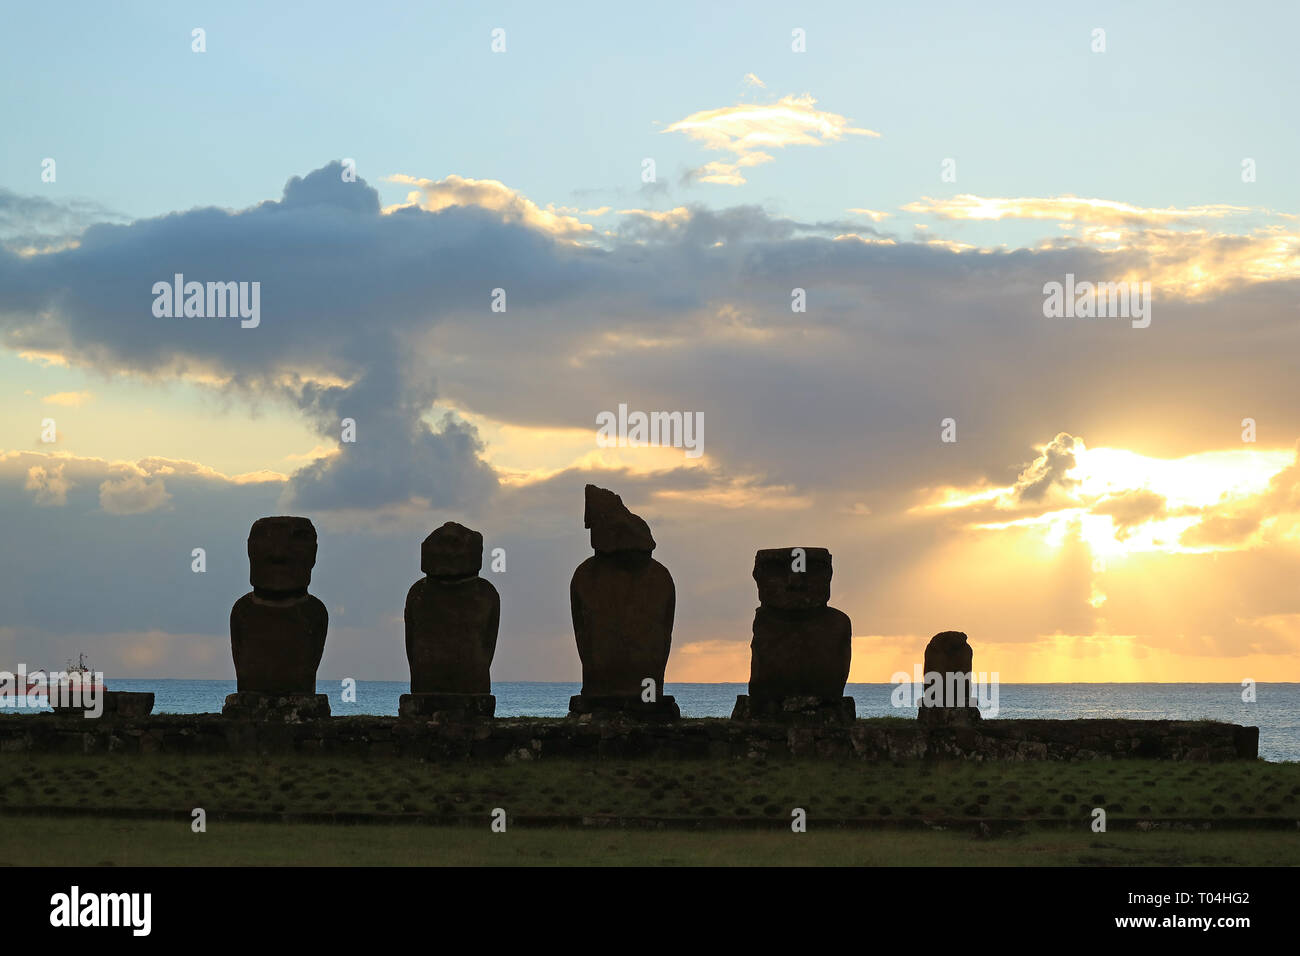 Silhouette of the Moais at Ahu Tahai Ceremonial Platform against Sunset over Pacific Ocean, Archaeological site on Easter Island, Chile Stock Photo